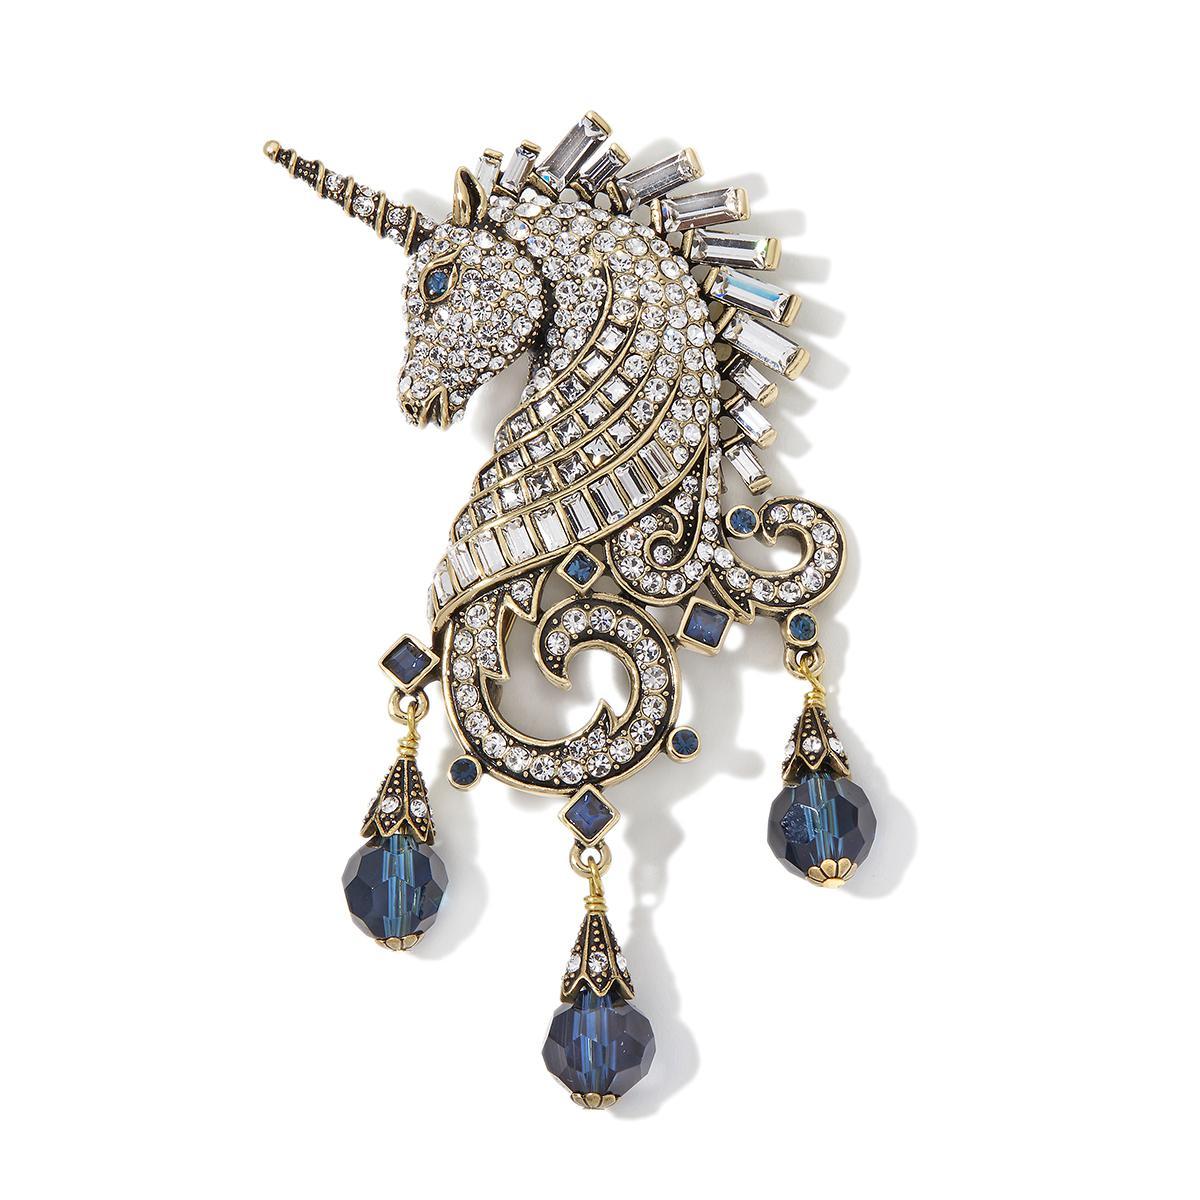 Much like the mythical creature itself, your beauty and style has become folklore. Enchant your look with this magical, sparkling crystal-encrusted design. Said to bring good luck to the wearer.

Design Information
Dimensional unicorn head design